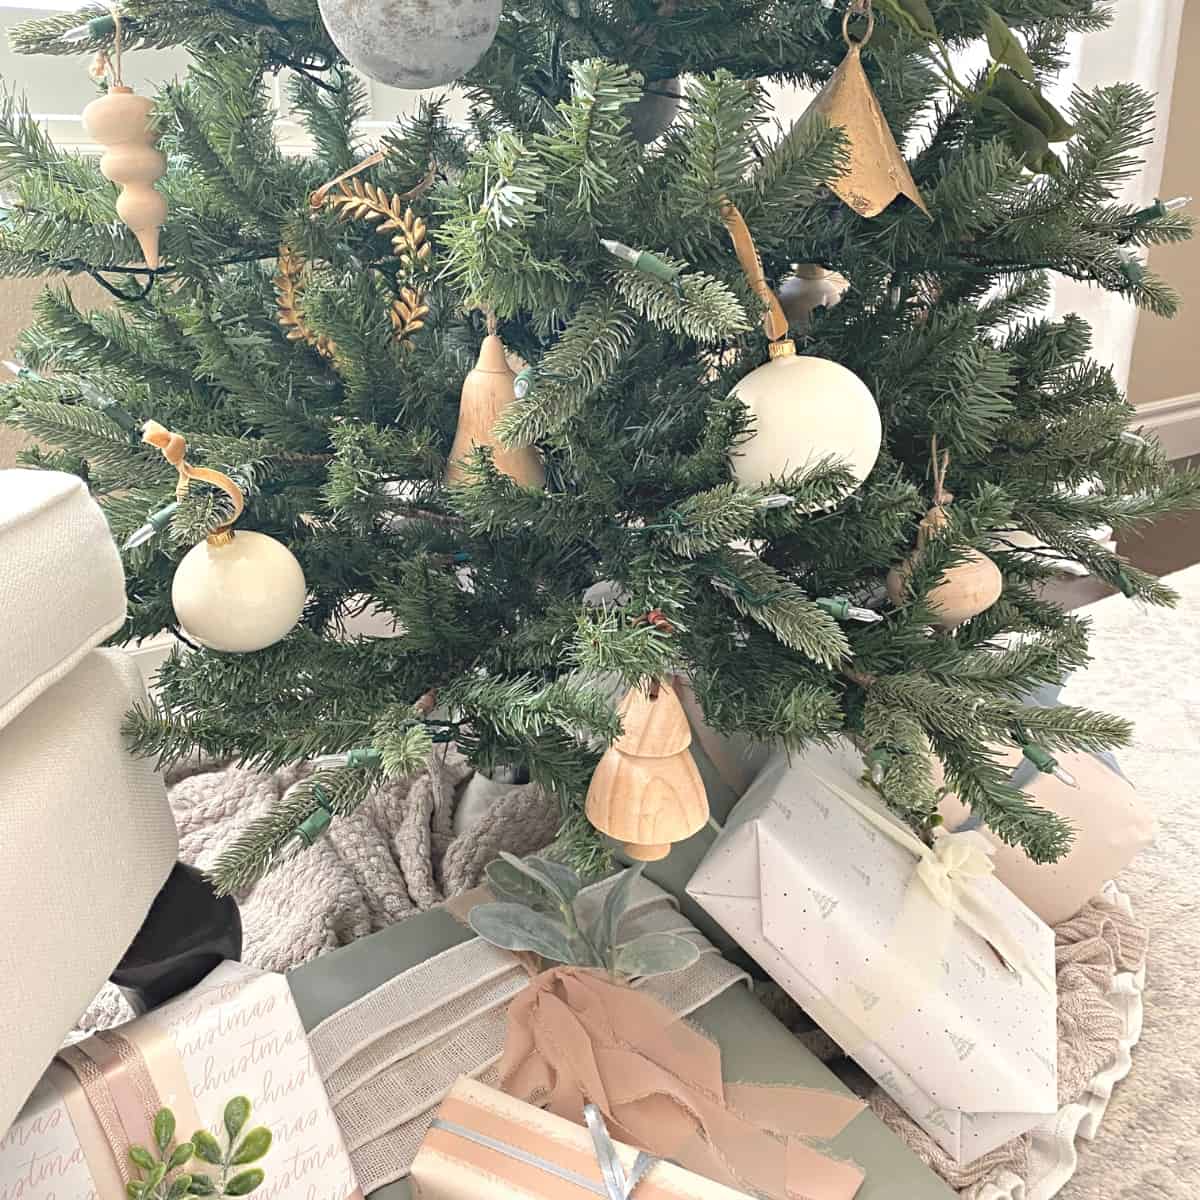 Neutral Christmas ornaments adorn a Christmas tree with presents beneath